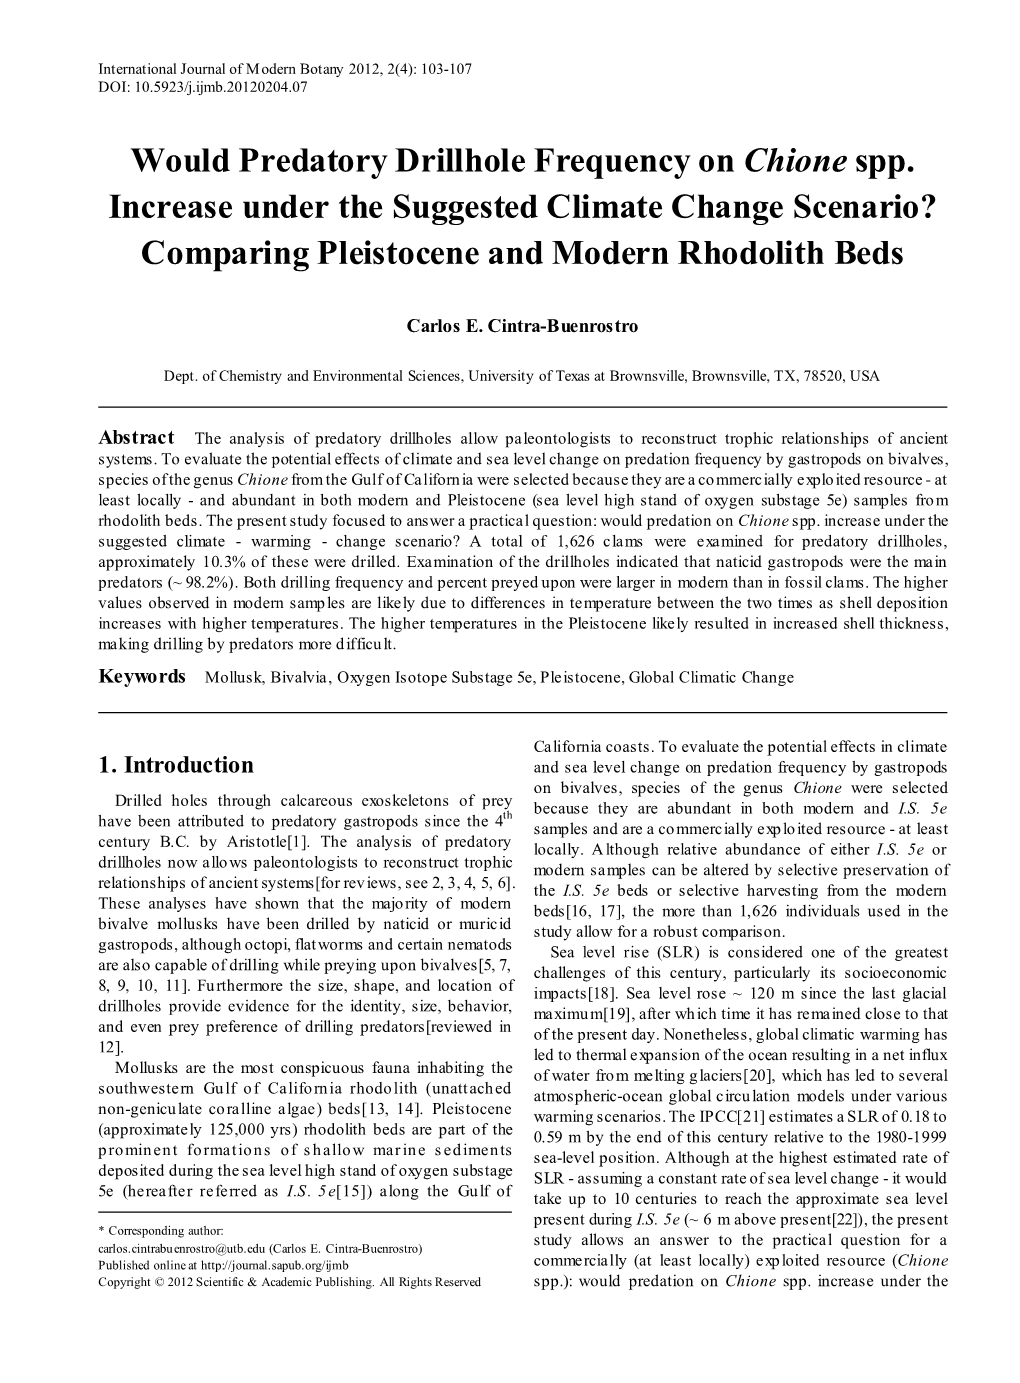 Would Predatory Drillhole Frequency on Chione Spp. Increase Under the Suggested Climate Change Scenario? Comparing Pleistocene and Modern Rhodolith Beds